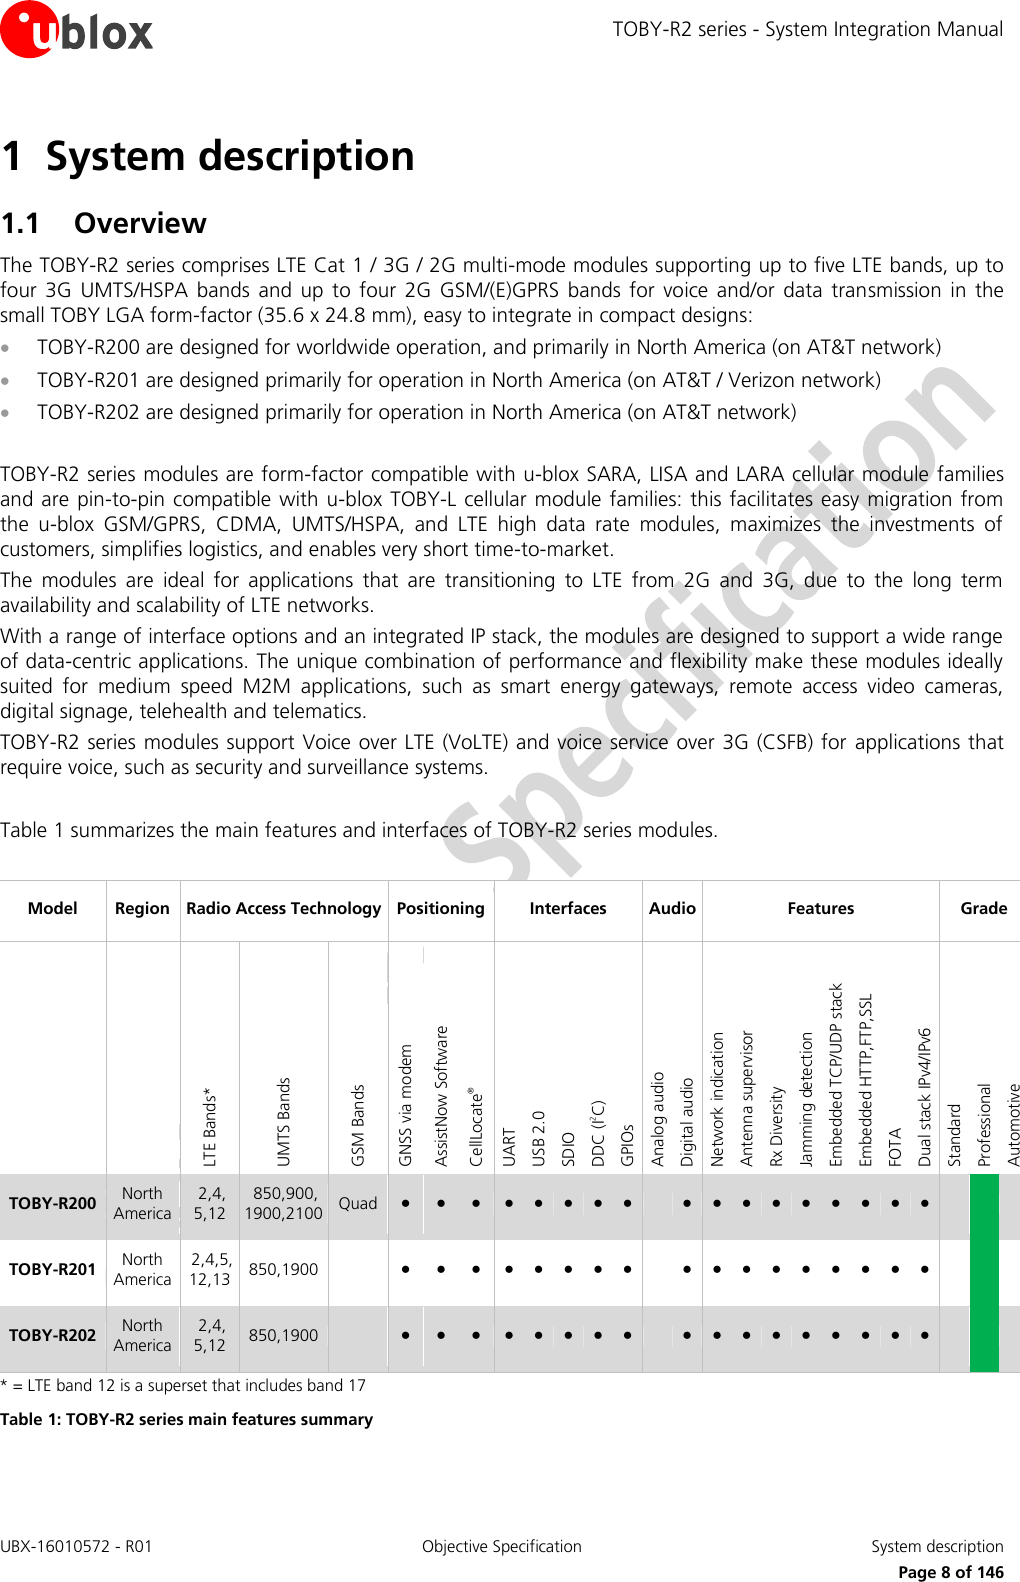 TOBY-R2 series - System Integration Manual UBX-16010572 - R01  Objective Specification  System description     Page 8 of 146 1 System description 1.1 Overview The TOBY-R2 series comprises LTE Cat 1 / 3G / 2G multi-mode modules supporting up to five LTE bands, up to four  3G  UMTS/HSPA  bands  and  up  to  four 2G  GSM/(E)GPRS  bands for  voice  and/or  data  transmission  in  the small TOBY LGA form-factor (35.6 x 24.8 mm), easy to integrate in compact designs:  TOBY-R200 are designed for worldwide operation, and primarily in North America (on AT&amp;T network)   TOBY-R201 are designed primarily for operation in North America (on AT&amp;T / Verizon network)  TOBY-R202 are designed primarily for operation in North America (on AT&amp;T network)  TOBY-R2 series modules are form-factor compatible with u-blox SARA, LISA and LARA cellular module families and are pin-to-pin compatible with u-blox TOBY-L cellular module families: this facilitates  easy migration from the  u-blox  GSM/GPRS,  CDMA,  UMTS/HSPA,  and  LTE  high  data  rate  modules,  maximizes  the  investments  of customers, simplifies logistics, and enables very short time-to-market. The  modules  are  ideal  for  applications  that  are  transitioning  to  LTE  from  2G  and  3G,  due  to  the  long  term availability and scalability of LTE networks. With a range of interface options and an integrated IP stack, the modules are designed to support a wide range of data-centric applications. The unique combination of performance and flexibility make these modules ideally suited  for  medium  speed  M2M  applications,  such  as  smart  energy  gateways,  remote  access  video  cameras, digital signage, telehealth and telematics. TOBY-R2 series modules support Voice over LTE (VoLTE) and voice service over 3G (CSFB) for  applications that require voice, such as security and surveillance systems.  Table 1 summarizes the main features and interfaces of TOBY-R2 series modules.  Model Region Radio Access Technology Positioning Interfaces Audio Features Grade   LTE Bands* UMTS Bands GSM Bands GNSS via modem AssistNow Software CellLocate® UART USB 2.0 SDIO  DDC (I2C) GPIOs Analog audio Digital audio  Network indication Antenna supervisor Rx Diversity Jamming detection Embedded TCP/UDP stack Embedded HTTP,FTP,SSL FOTA Dual stack IPv4/IPv6 Standard Professional Automotive TOBY-R200 North America  2,4, 5,12  850,900, 1900,2100 Quad ● ● ● ● ● ● ● ●  ● ● ● ● ● ● ● ● ●    TOBY-R201 North America  2,4,5, 12,13 850,1900  ● ● ● ● ● ● ● ●  ● ● ● ● ● ● ● ● ●    TOBY-R202 North America  2,4, 5,12 850,1900  ● ● ● ● ● ● ● ●  ● ● ● ● ● ● ● ● ●    * = LTE band 12 is a superset that includes band 17 Table 1: TOBY-R2 series main features summary  